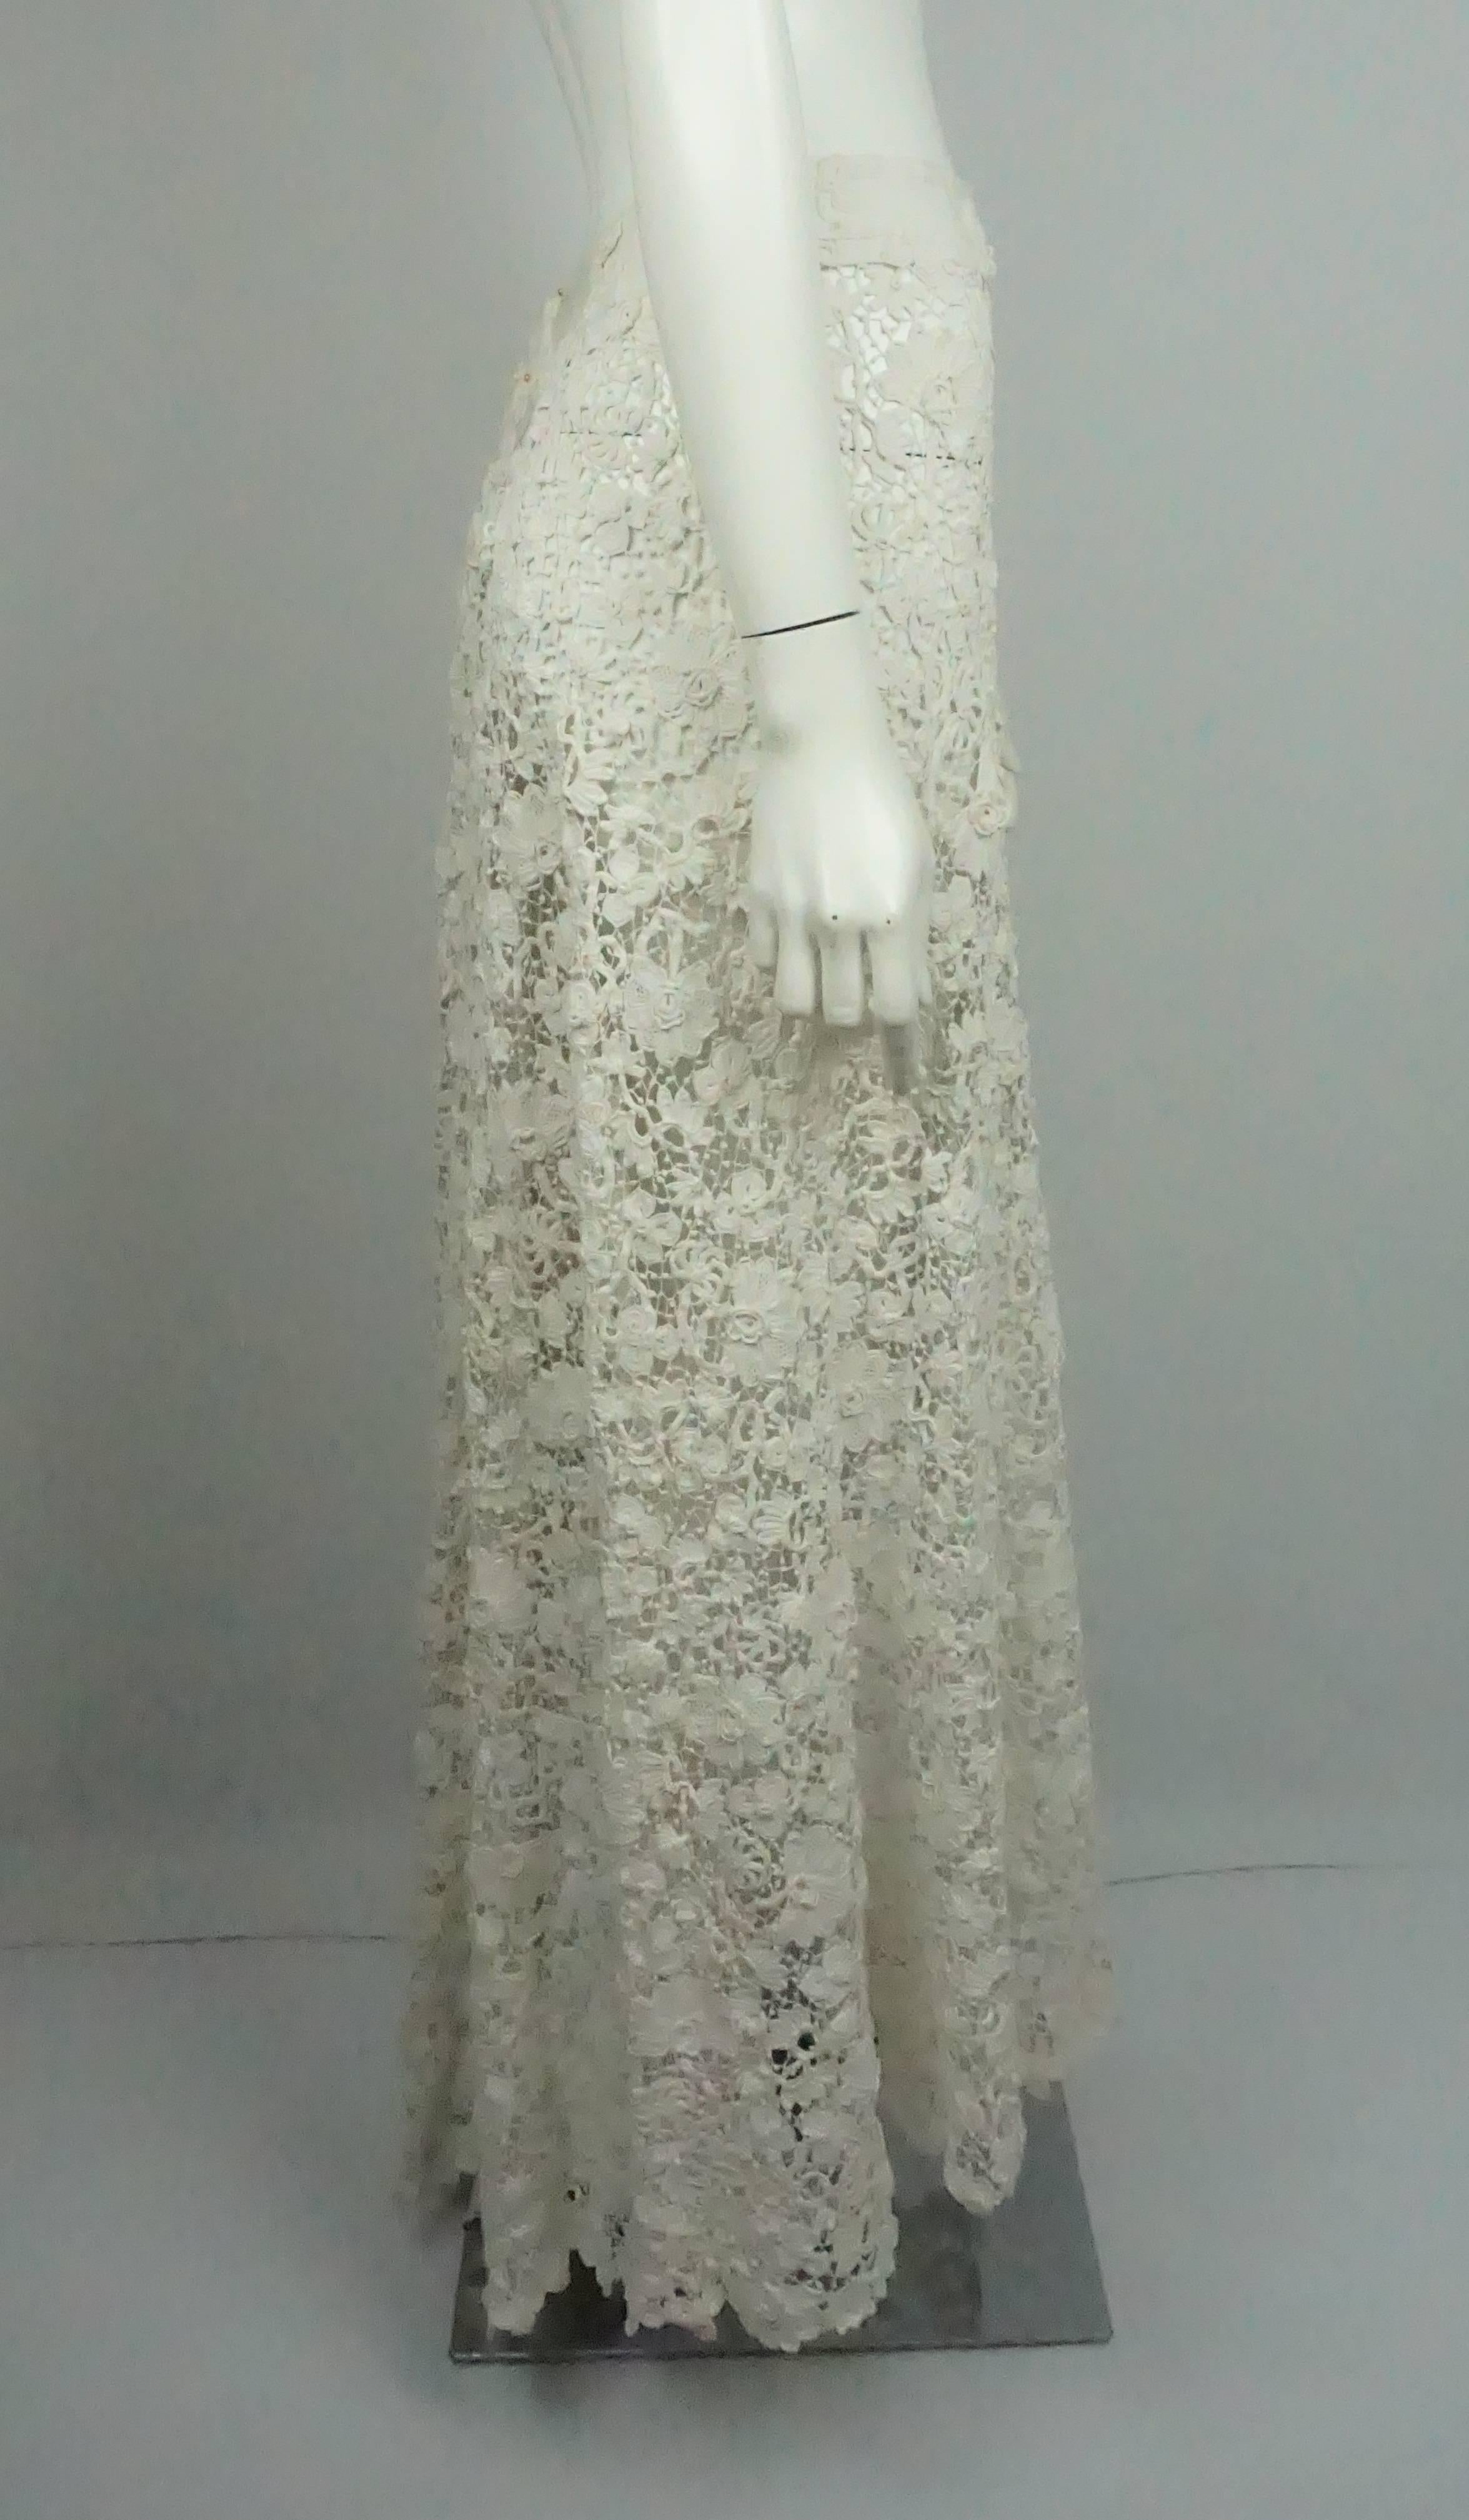 Ralph Lauren Vintage Ivory Irish Crochet 1900's Lace Skirt - NWT  This spectacular Ralph Lauren Vintage piece is one of a kind and made with Irish Crochet Lace from the 1900's. This very special skirt would be wonderful for a very special occasion.